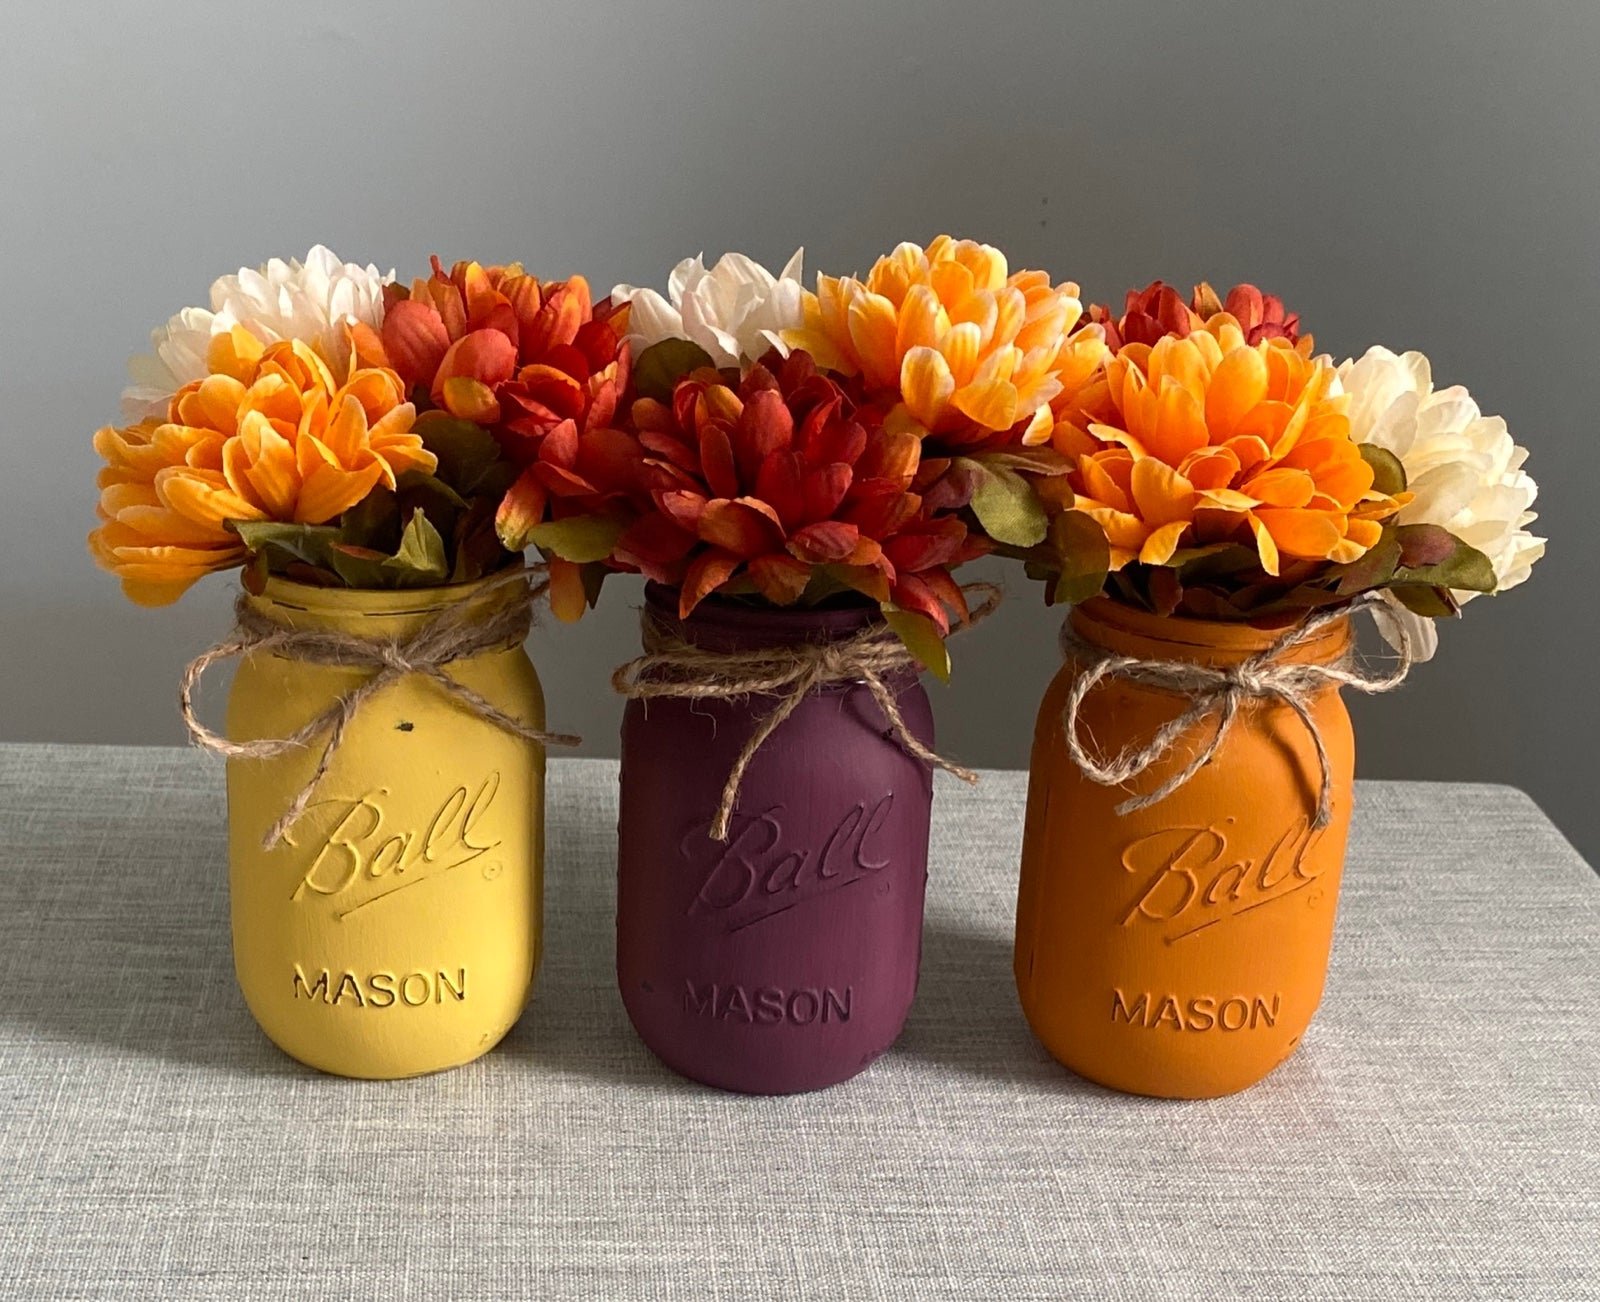 Hand-crafted distressed chalk painted Mason jar vases w